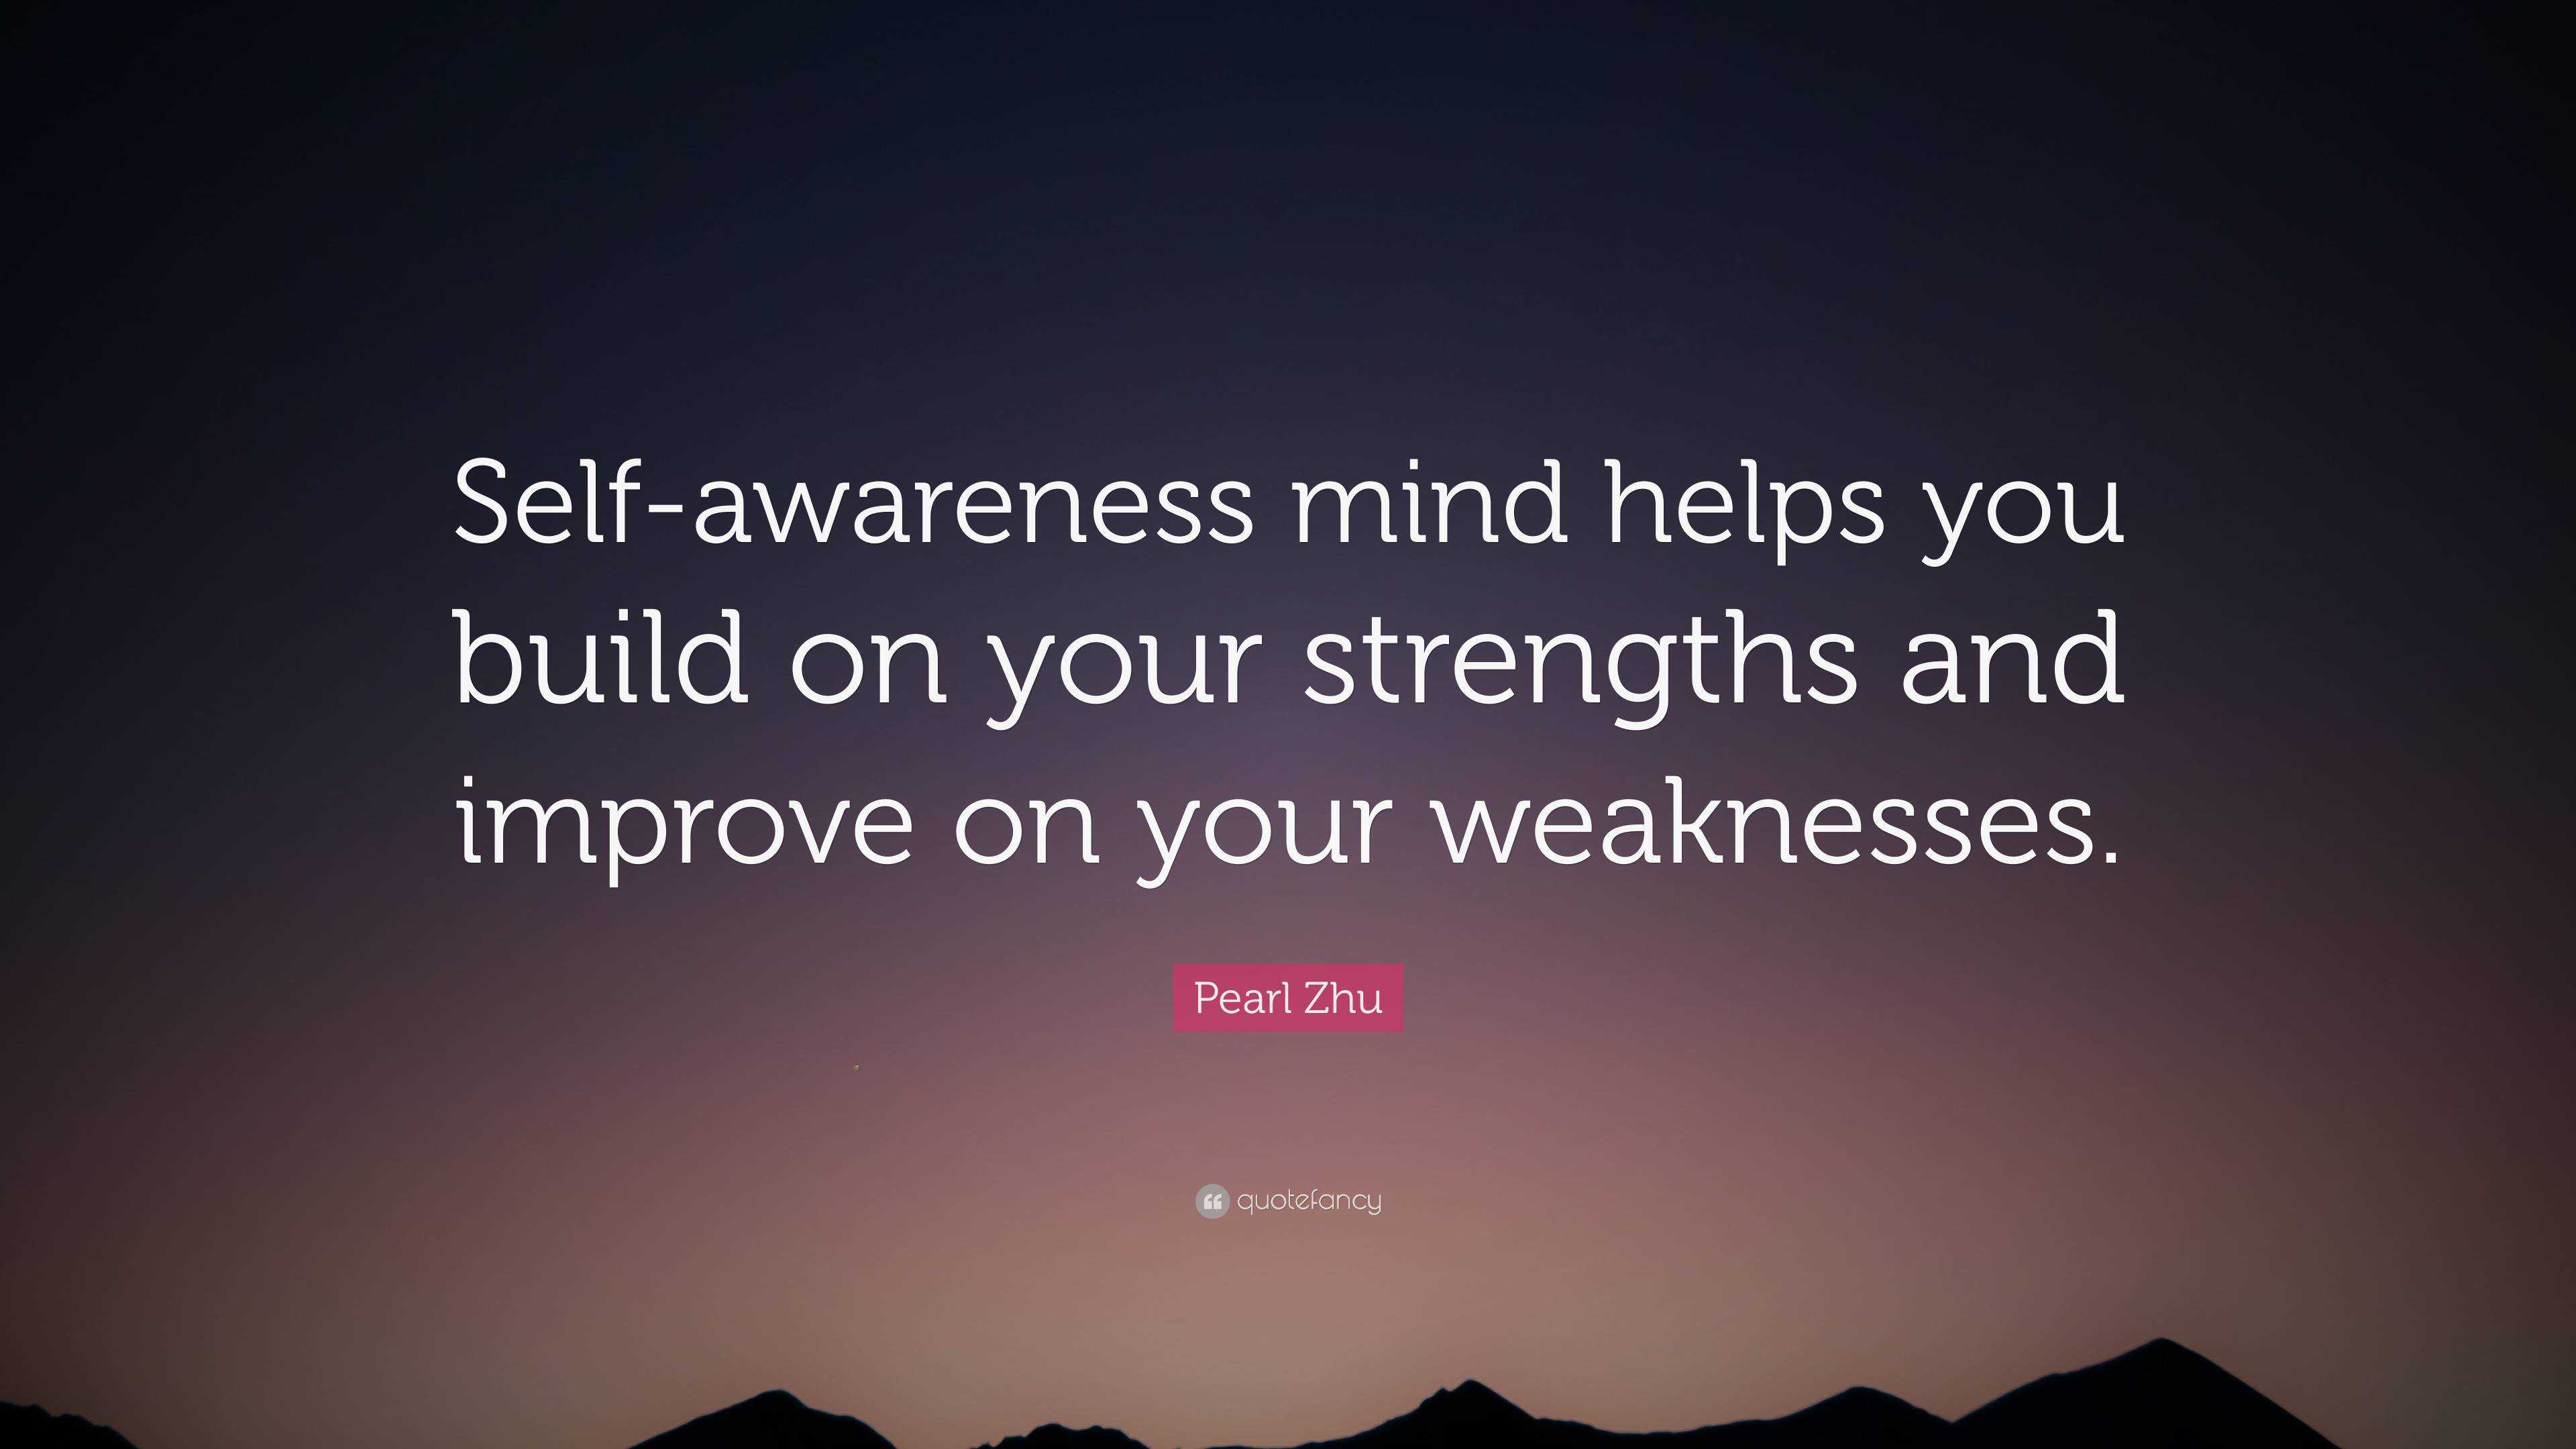 Pearl Zhu Quote “self Awareness Mind Helps You Build On Your Strengths